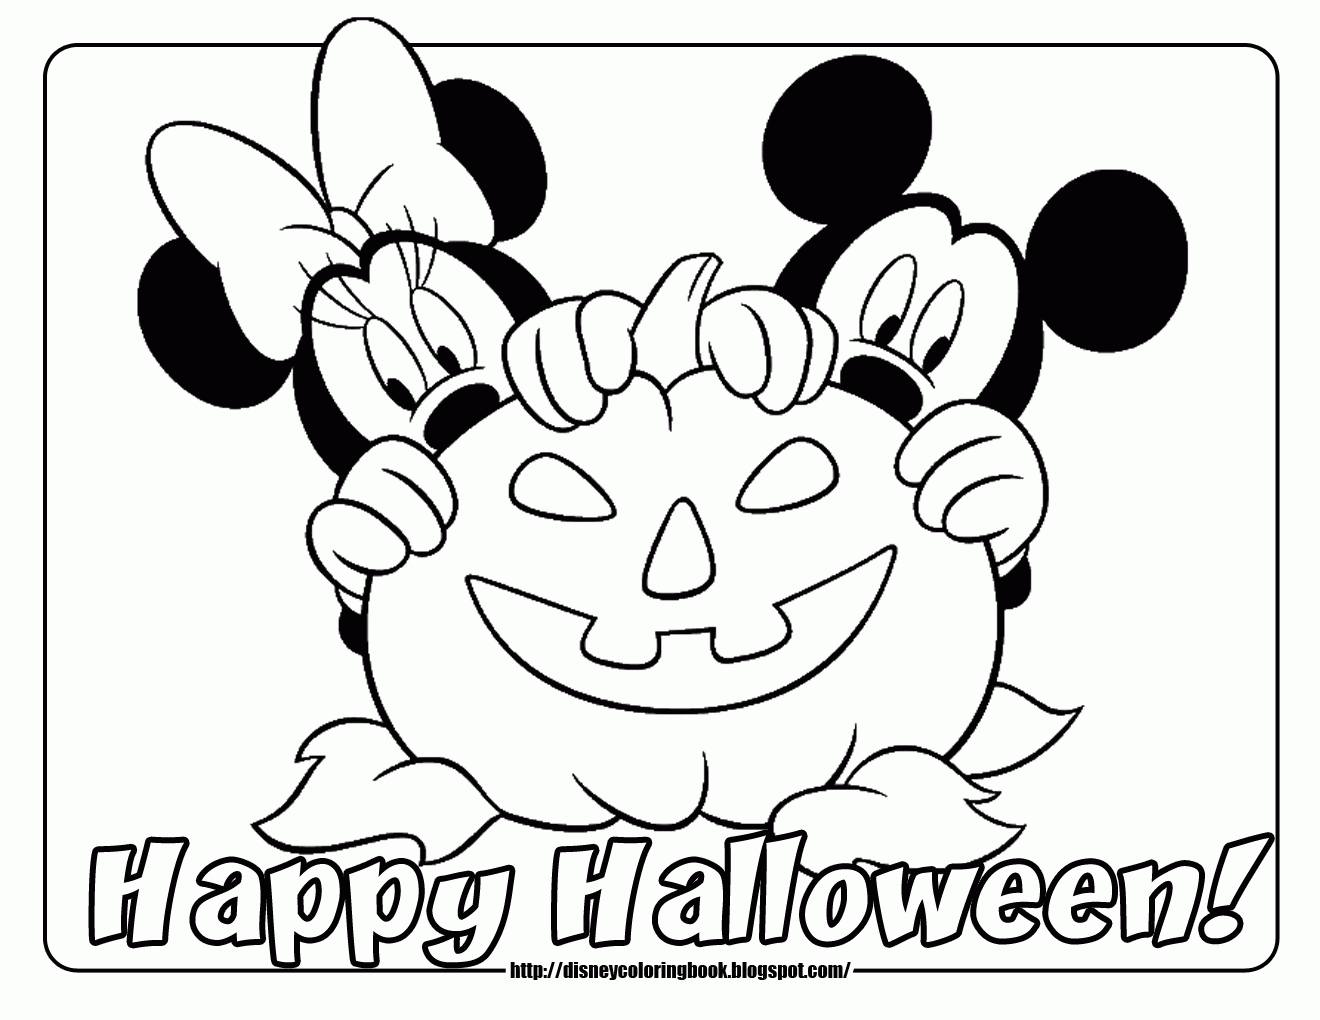 Mickey Mouse Coloring Page (16 Pictures) - Colorine.net | 11193